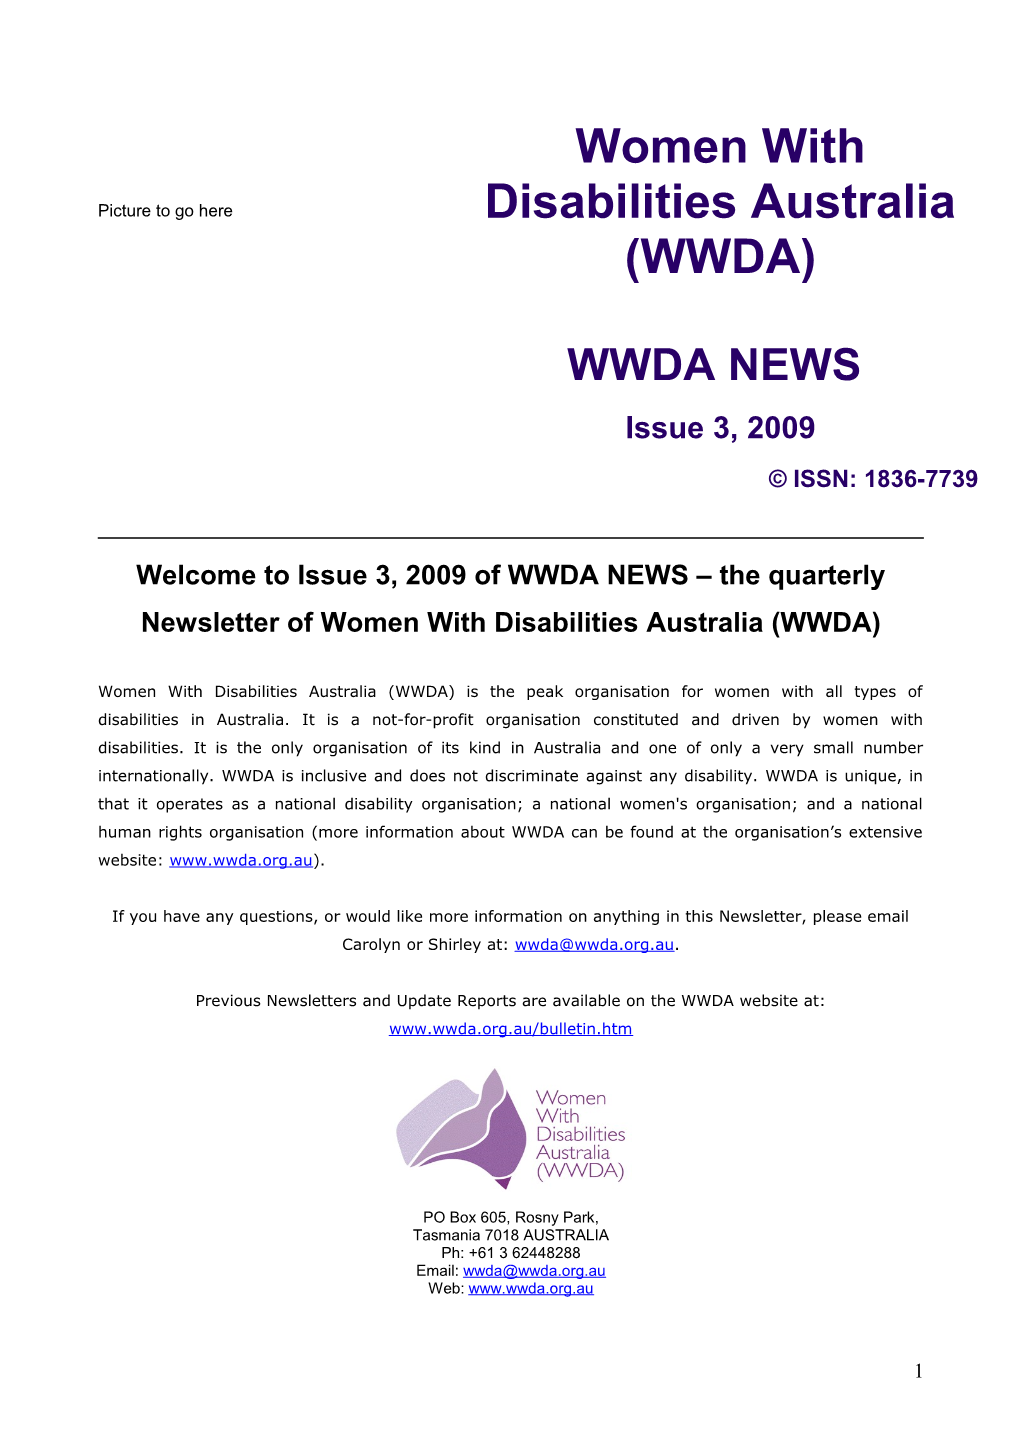 Welcome to Issue 3, 2009 of WWDA NEWS the Quarterly Newsletter of Women with Disabilities